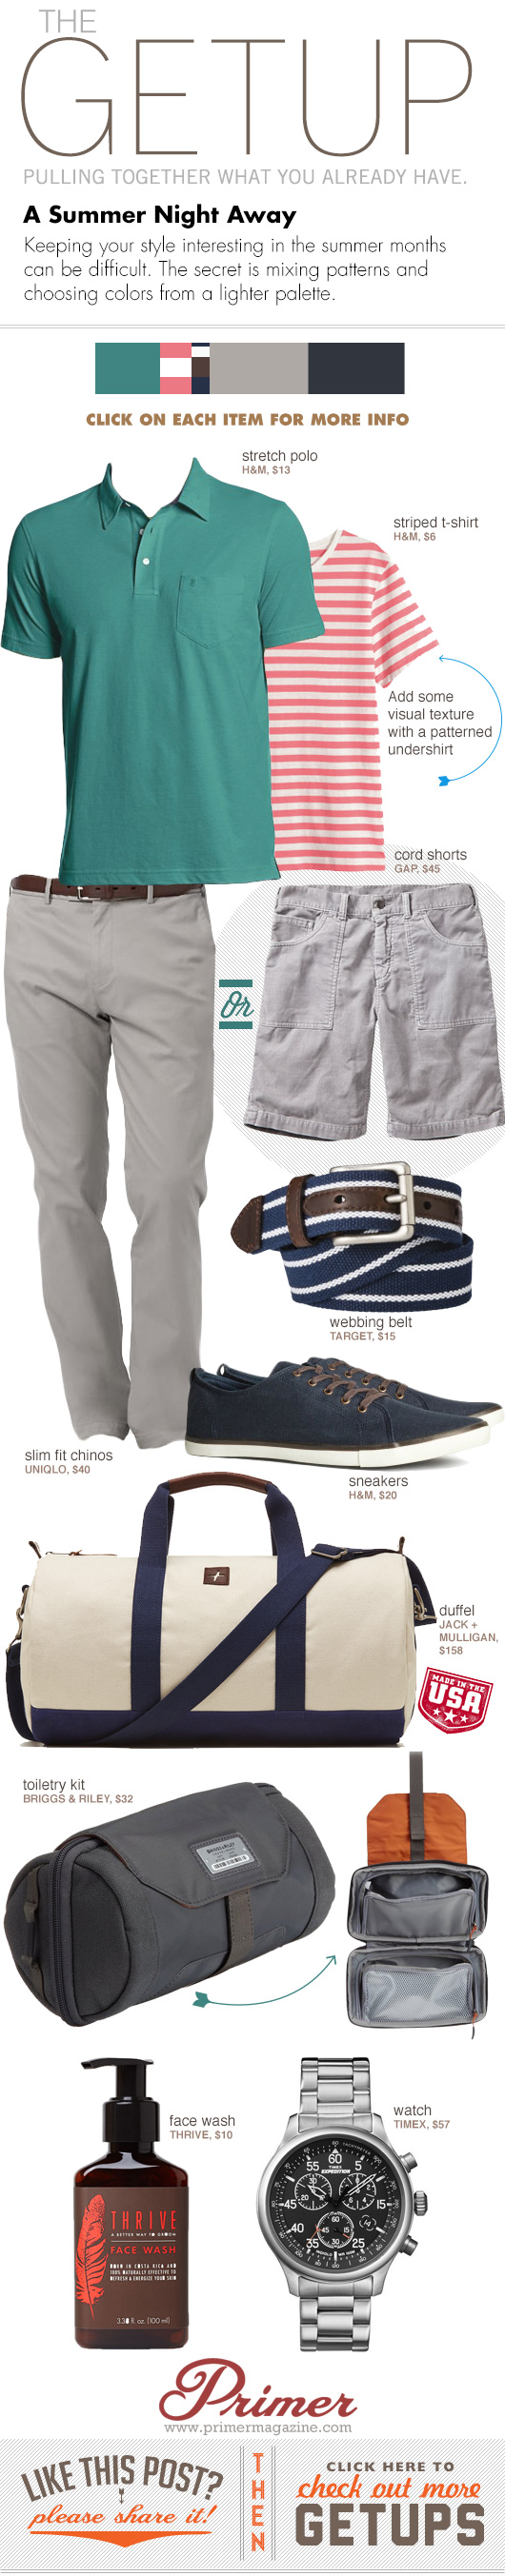 Getup Summer Night Away - Green polo, striped tshirt, gray pants or shorts, and blue sneakers